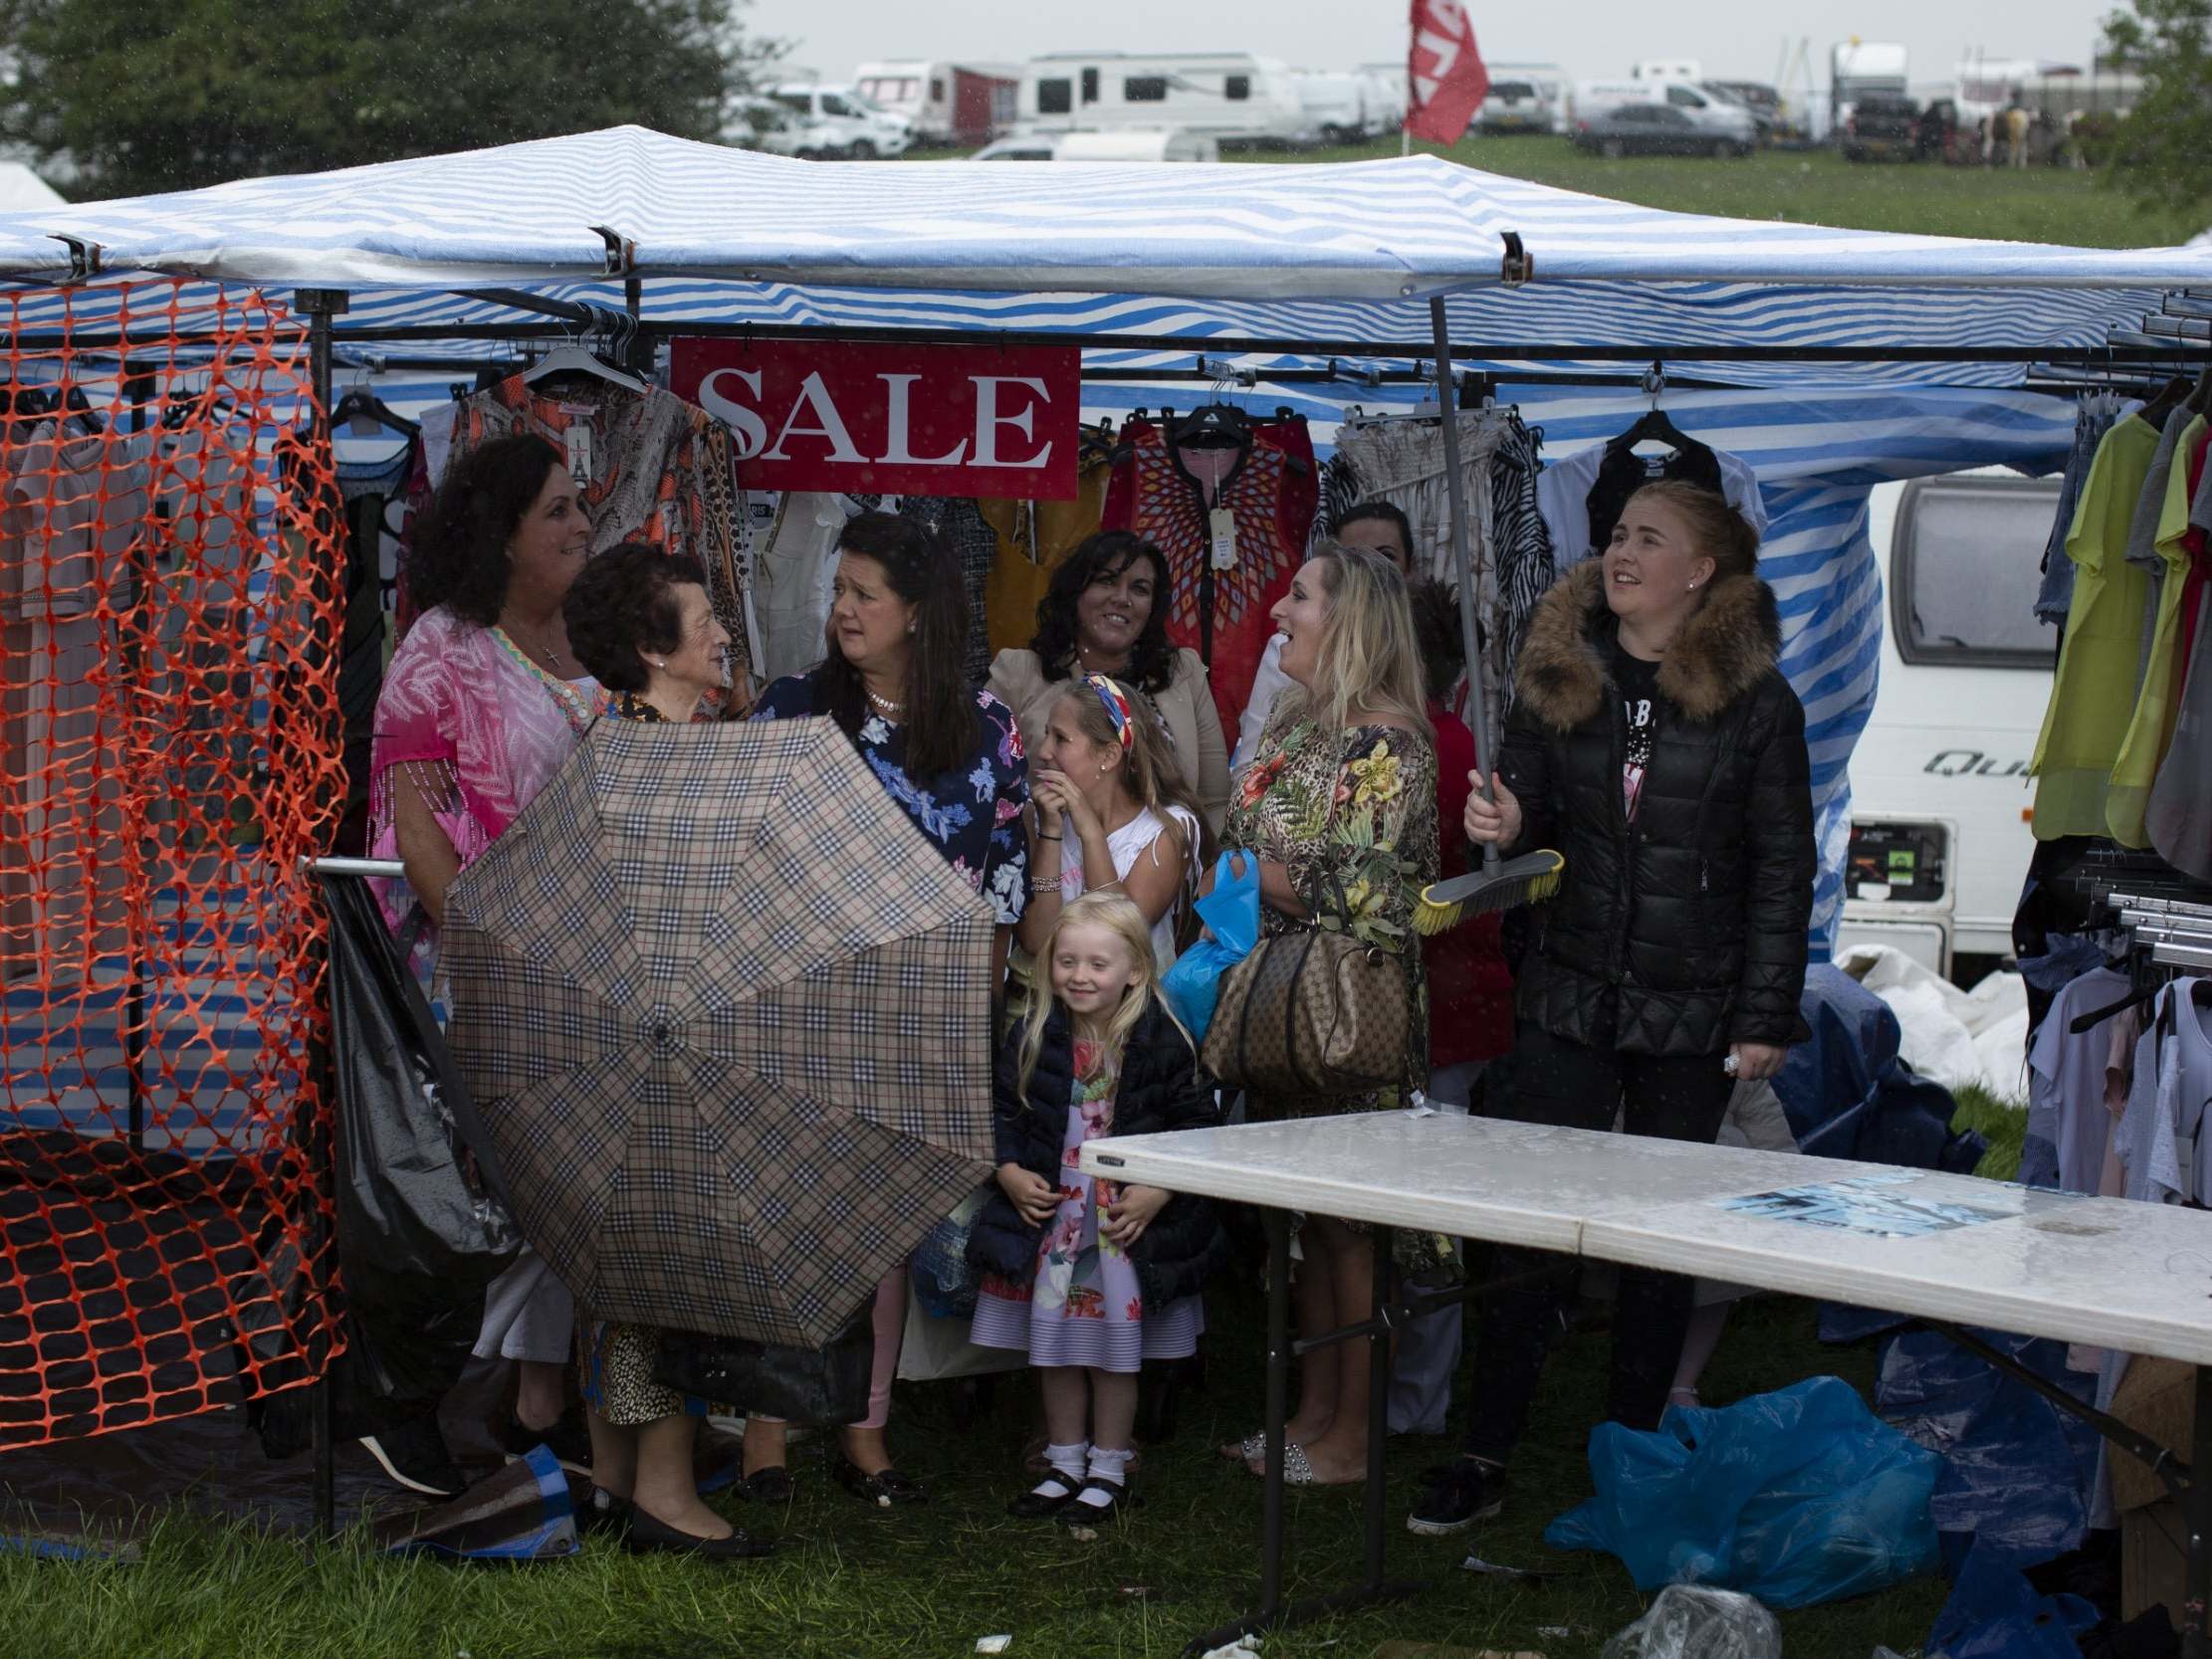 People shelter from rain during the Appleby Horse Fair, an annual gathering for Gypsy, Romany and Traveller communities that dates back to 1685